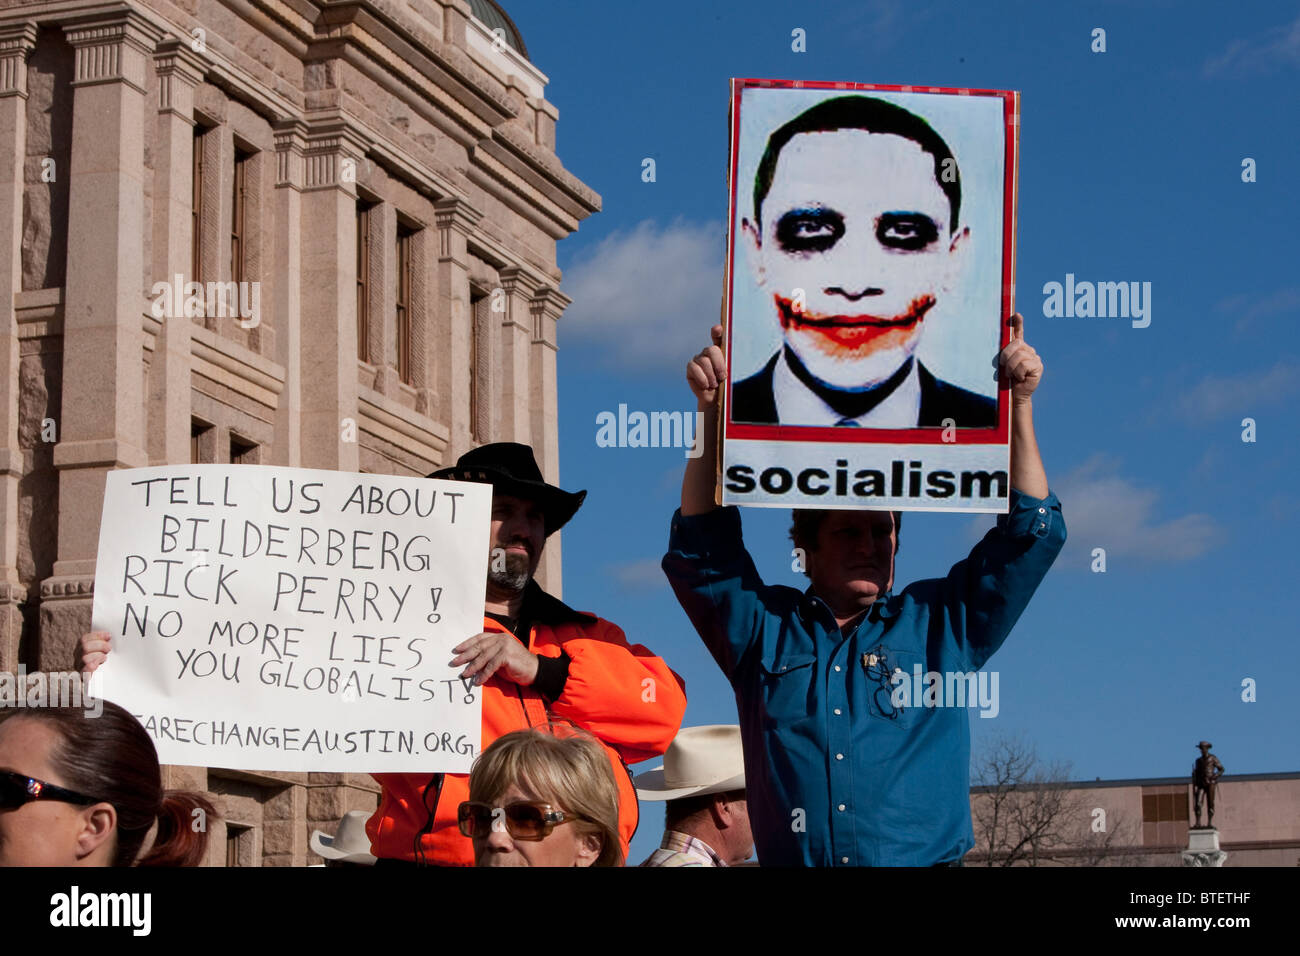 A coalition of Tea Party groups advocating diverse causes rally against Democrats and Pres. Barack Obama in Austin, Texas Stock Photo